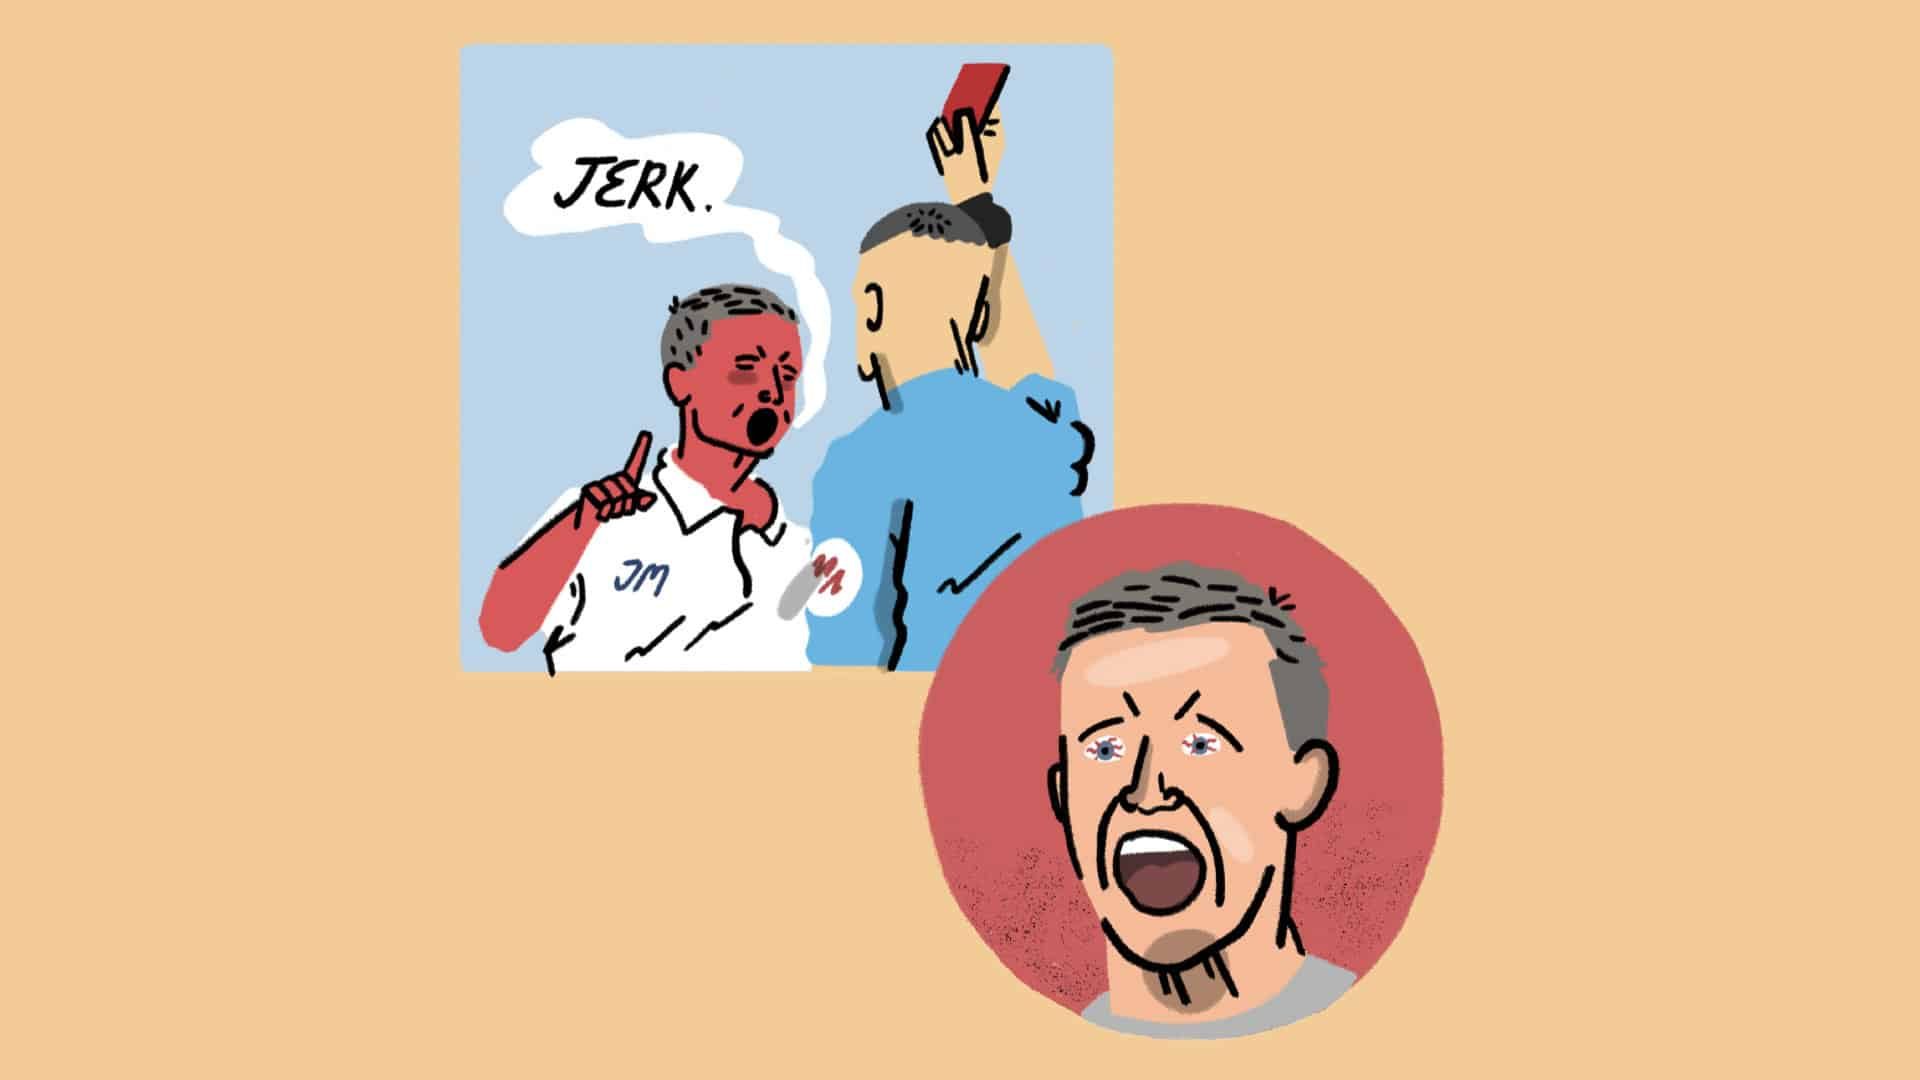 An illustration of Jesse Marsch, red in the face, being given a red card by a referee. There is a speech bubble with Jesse shouting 'JERK'